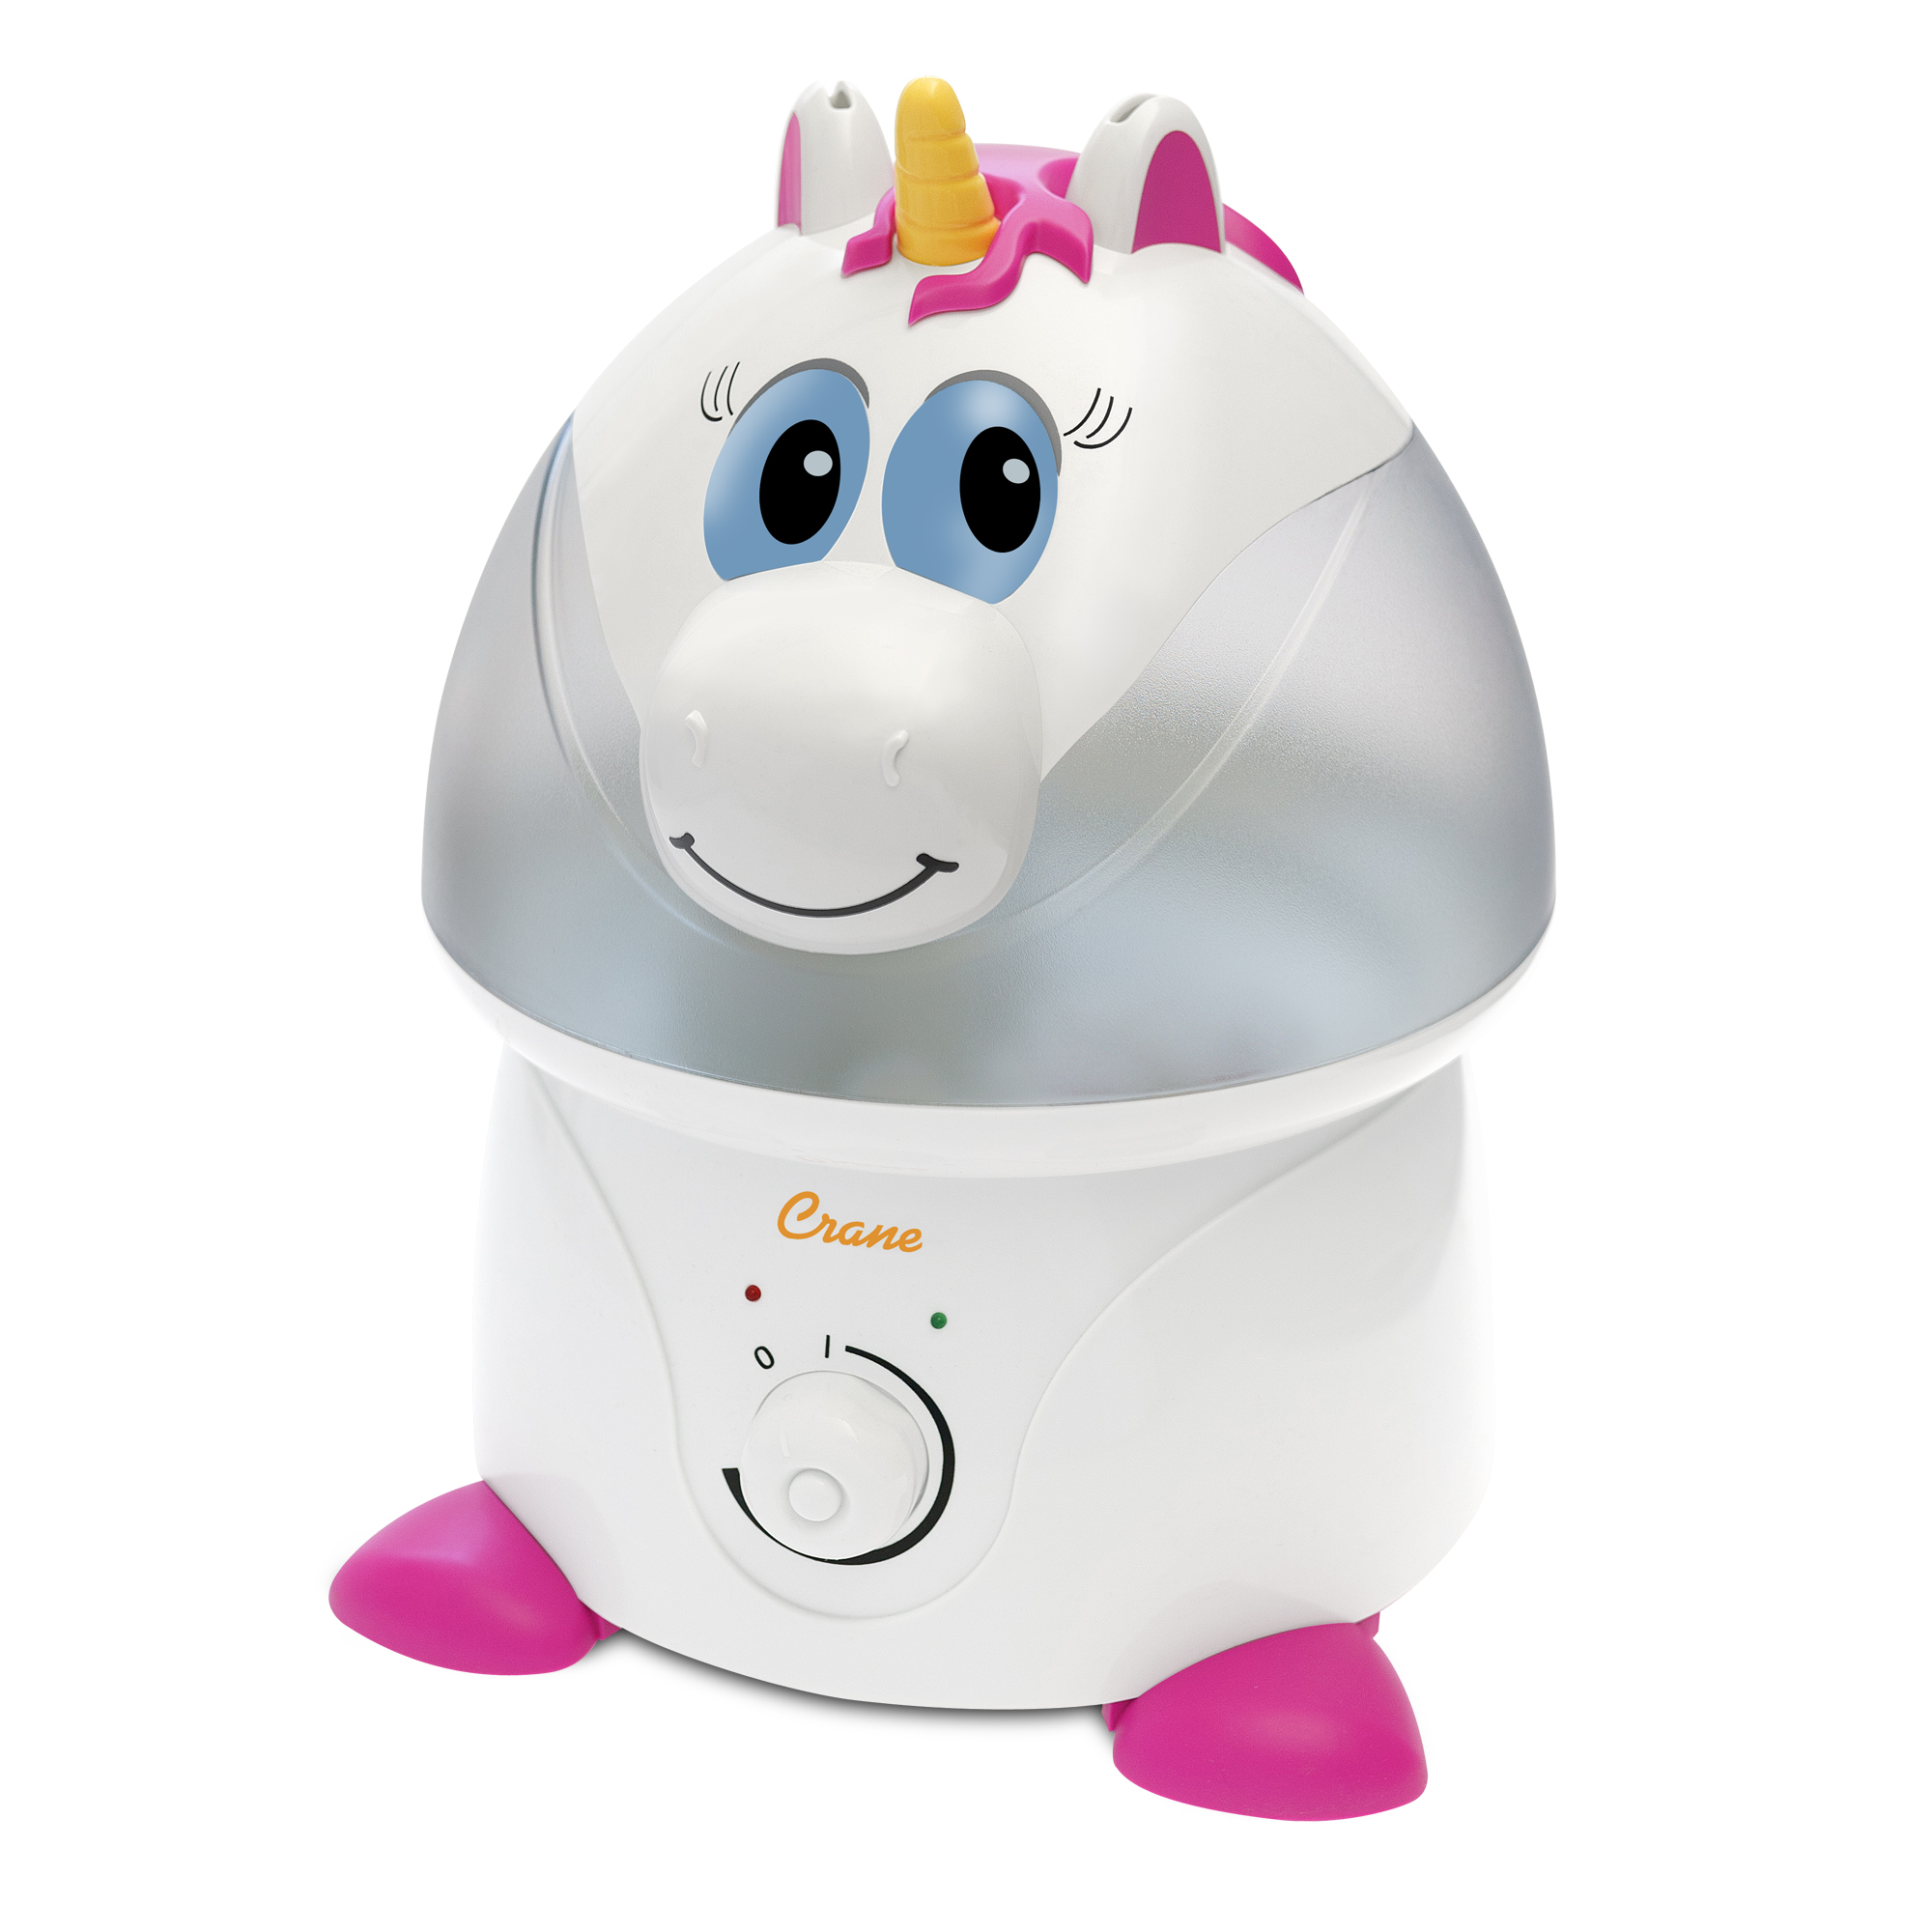 The 7 Best Humidifiers for Your Baby, With Advice From Pediatricians